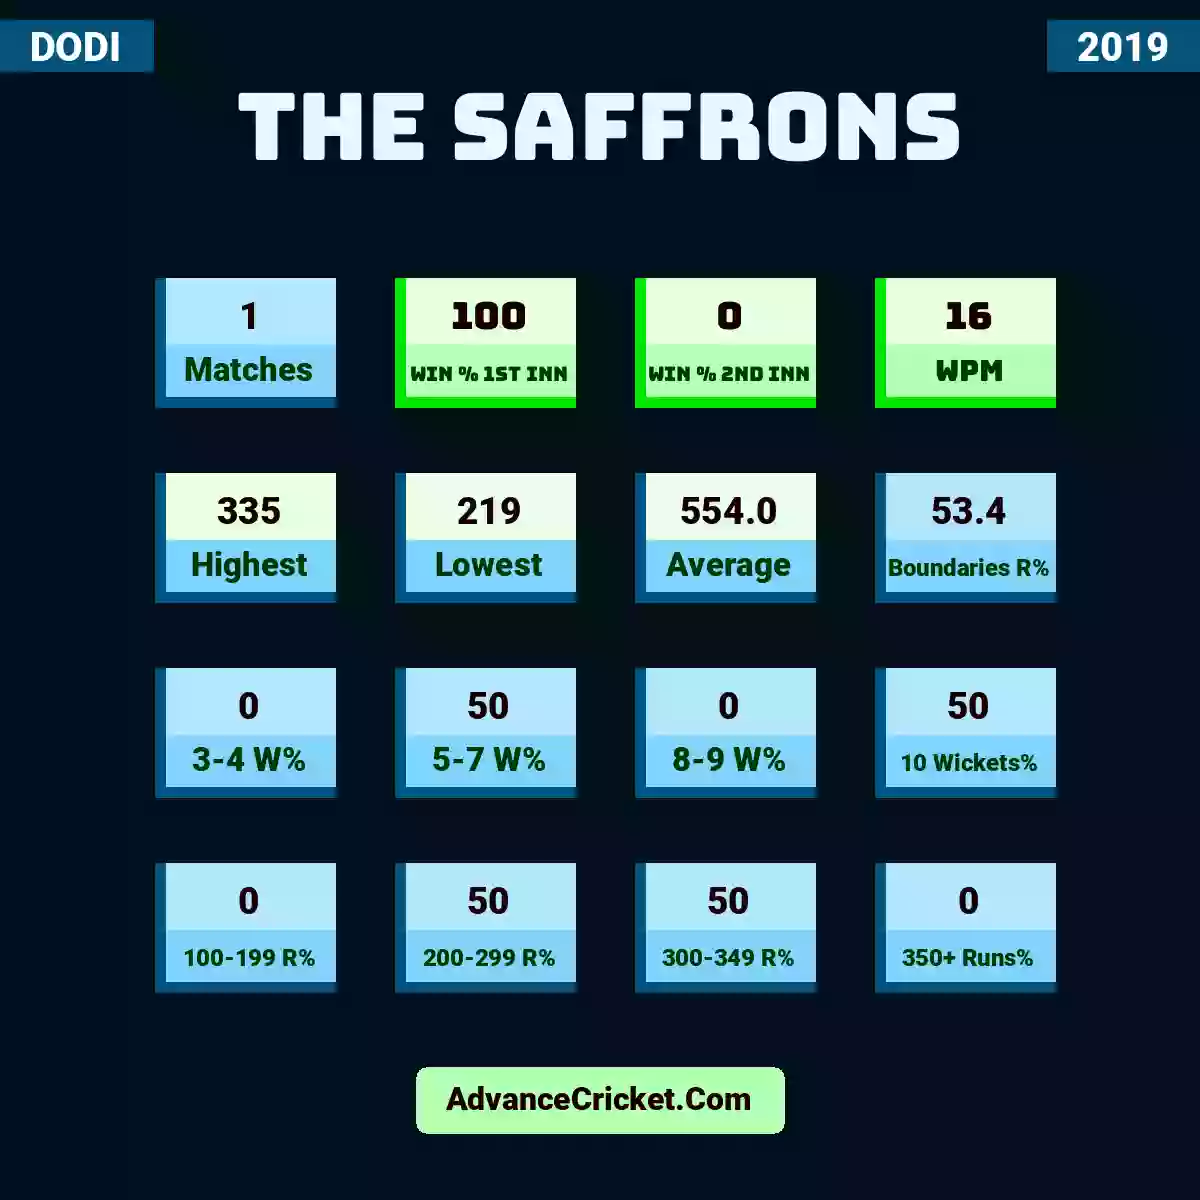 Image showing The Saffrons with Matches: 1, Win % 1st Inn: 100, Win % 2nd Inn: 0, WPM: 16, Highest: 335, Lowest: 219, Average: 554.0, Boundaries R%: 53.4, 3-4 W%: 0, 5-7 W%: 50, 8-9 W%: 0, 10 Wickets%: 50, 100-199 R%: 0, 200-299 R%: 50, 300-349 R%: 50, 350+ Runs%: 0.